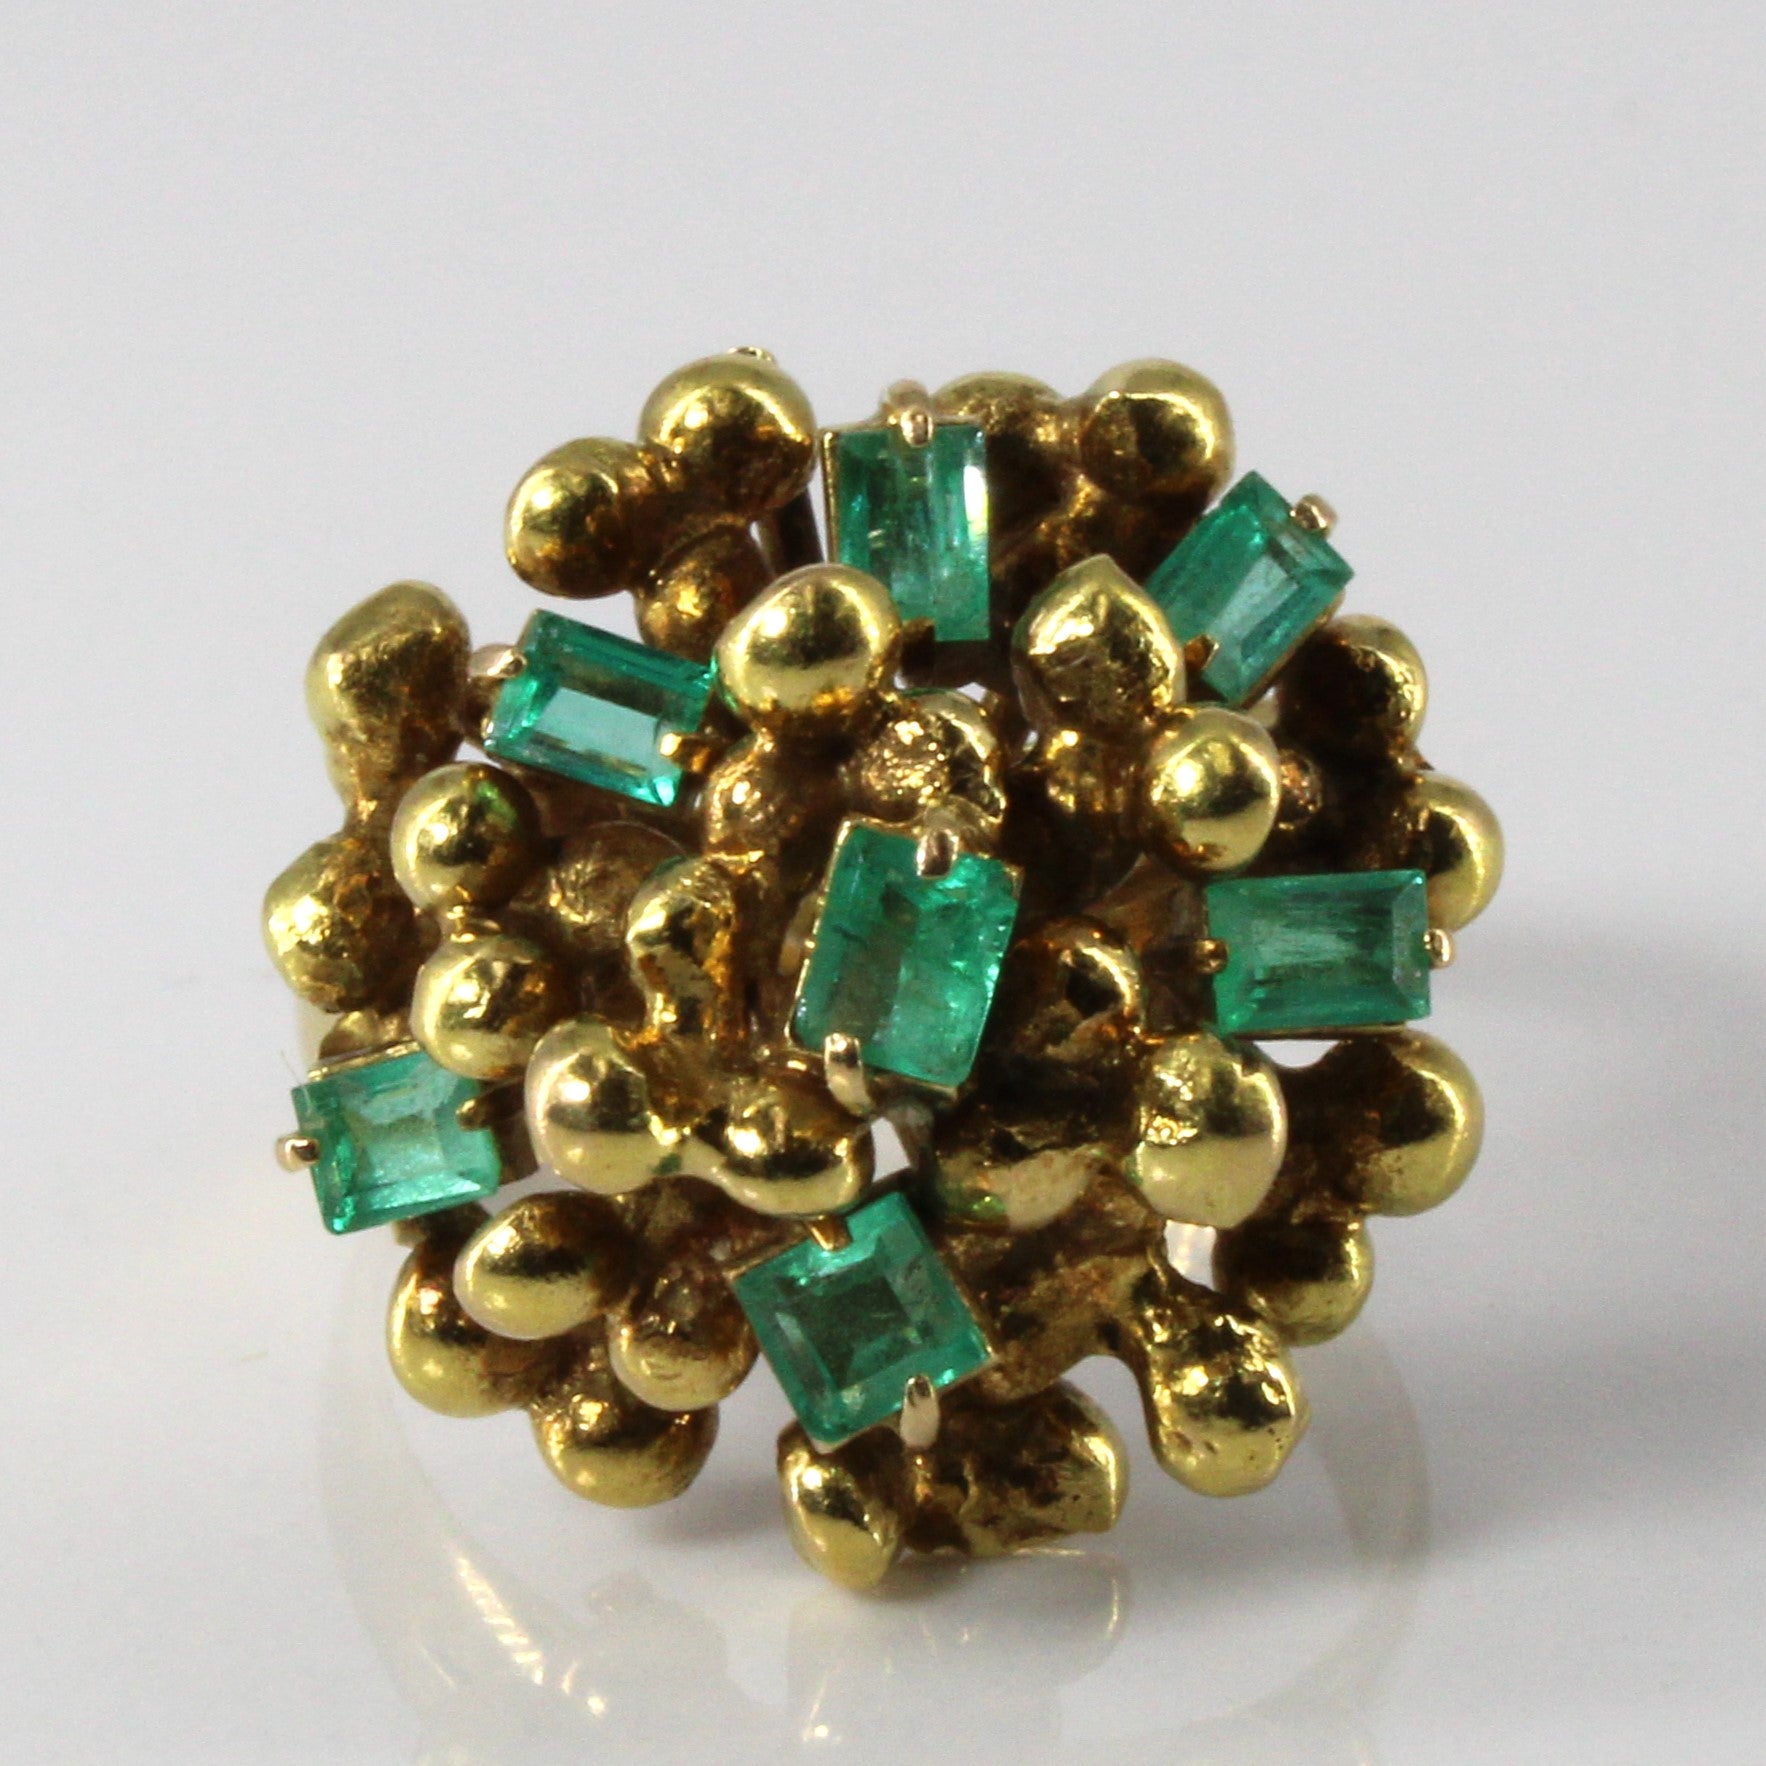 Textured Emerald Cocktail Ring | 0.68ctw | SZ 6.75 |